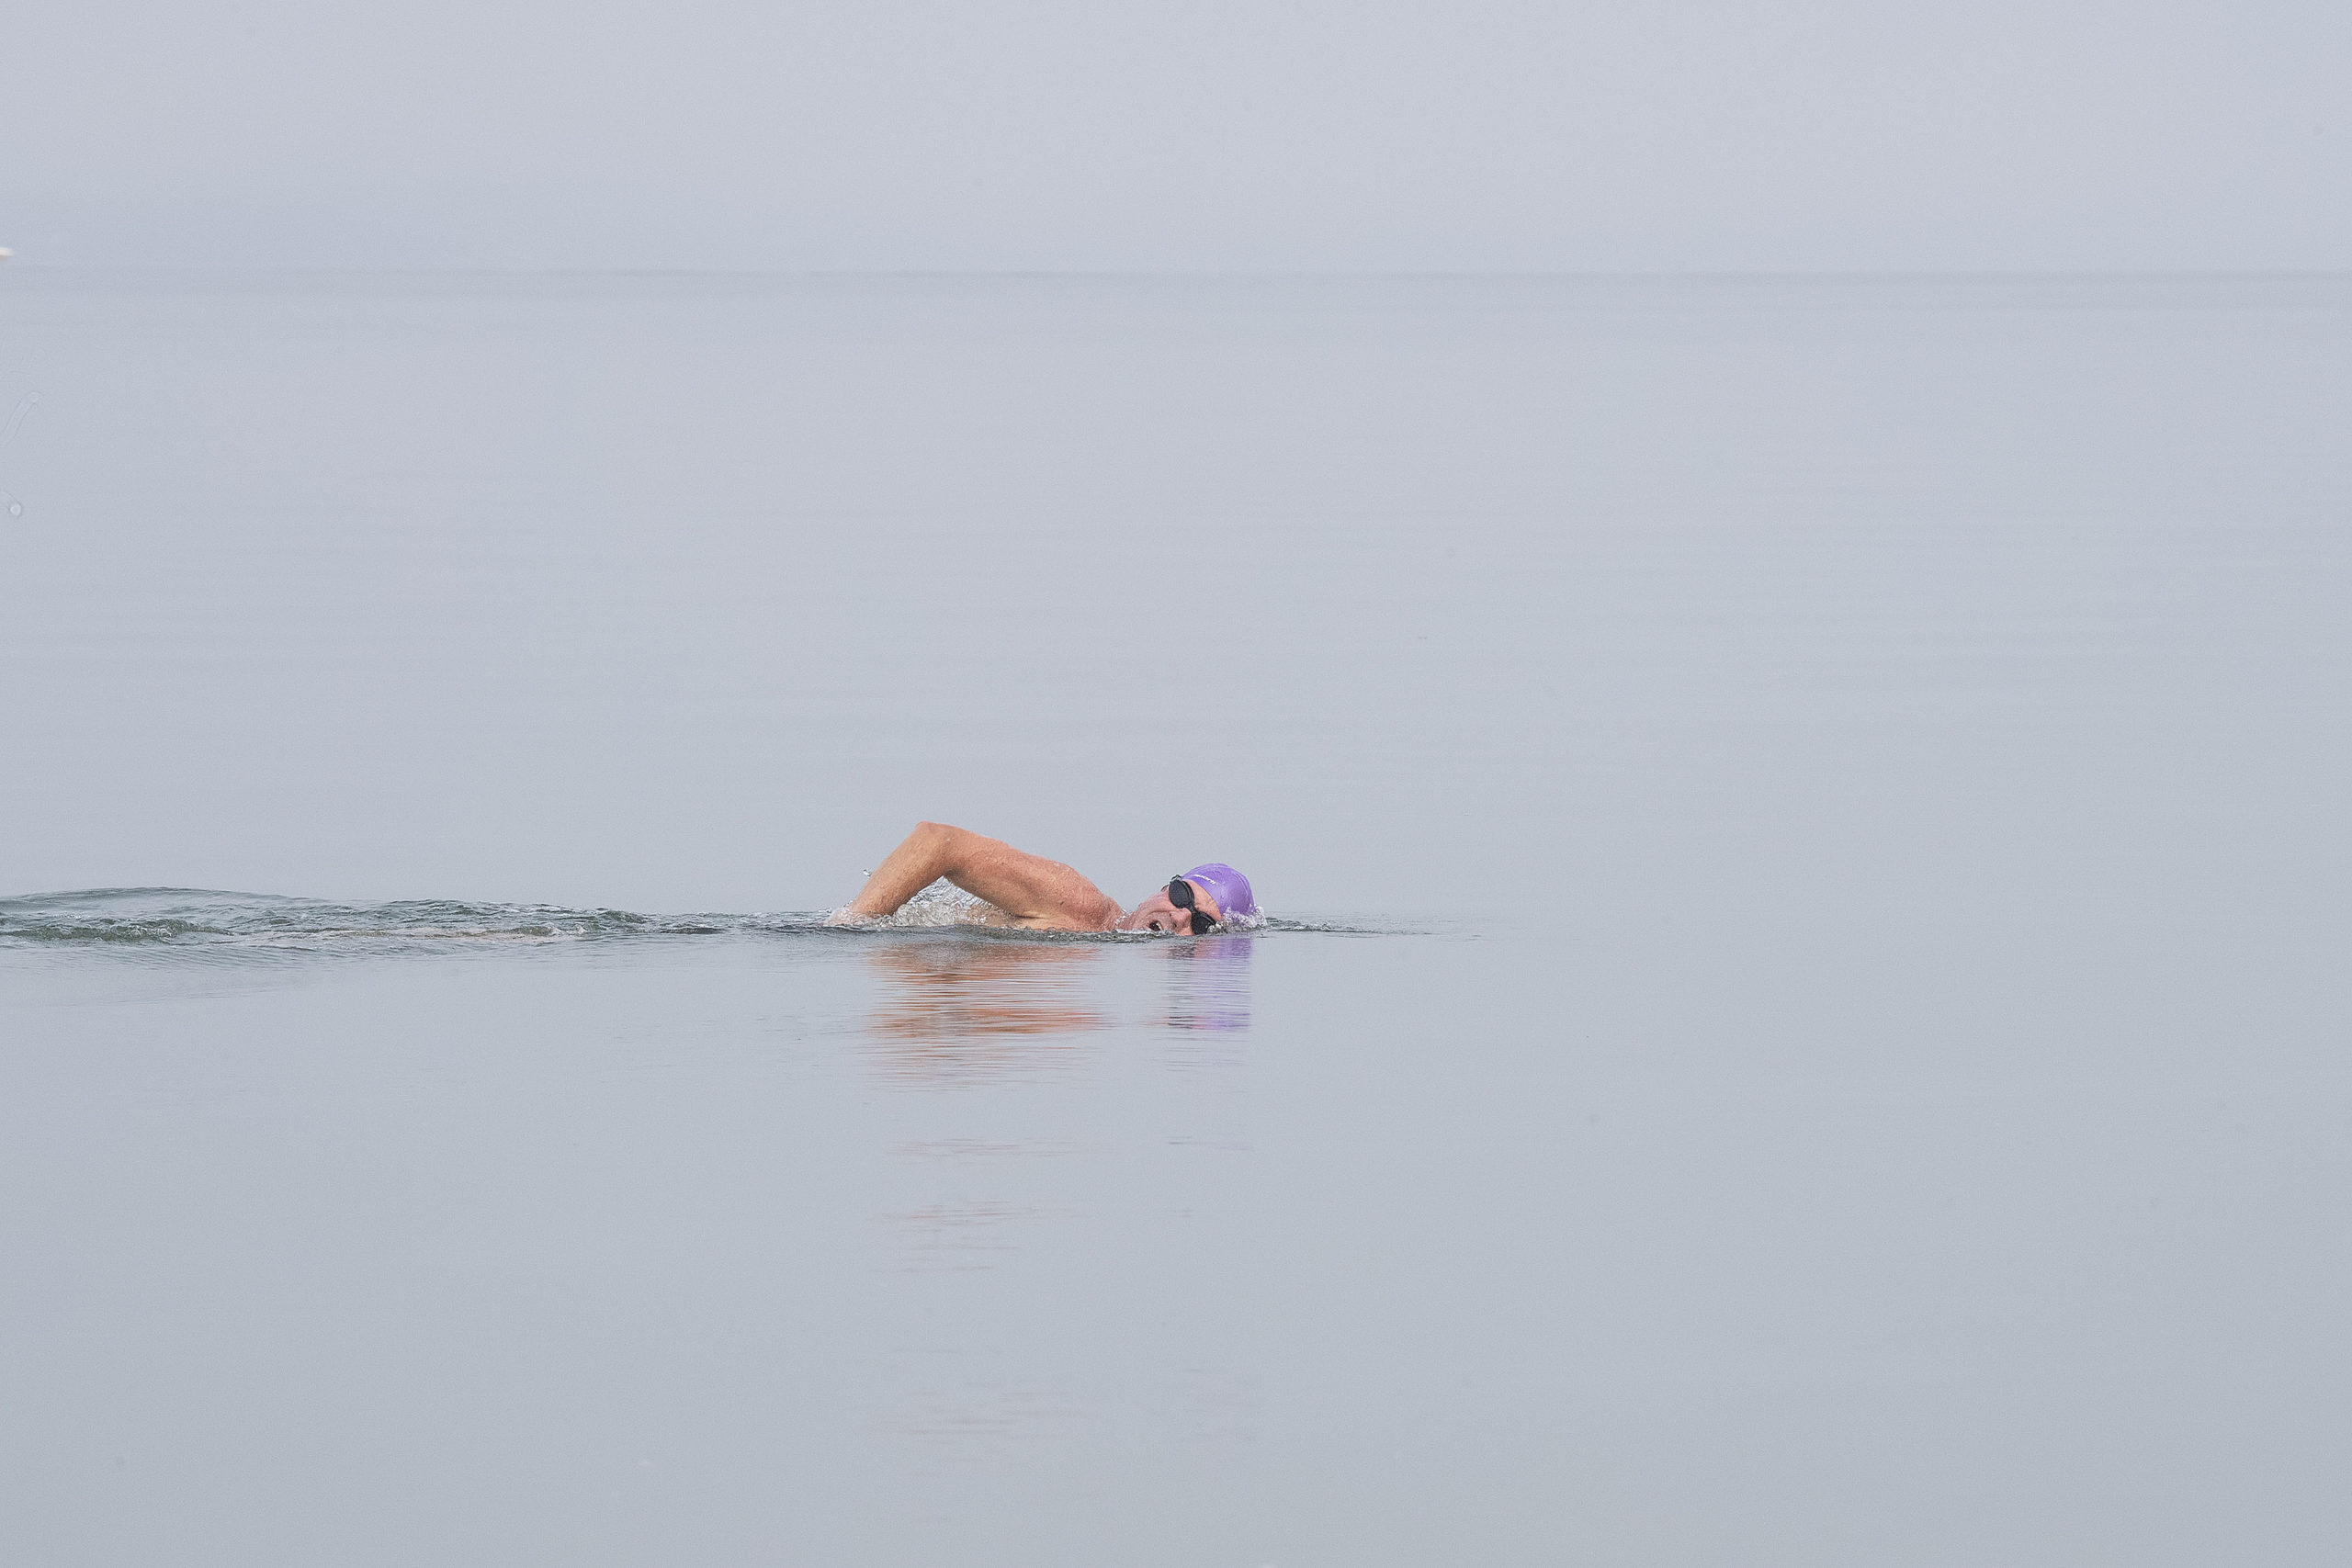 A competitor swims during the first leg of the Hamptons Young at Heart Triathlon, held at Long Beach in Sag Harbor on Saturday, July 17.